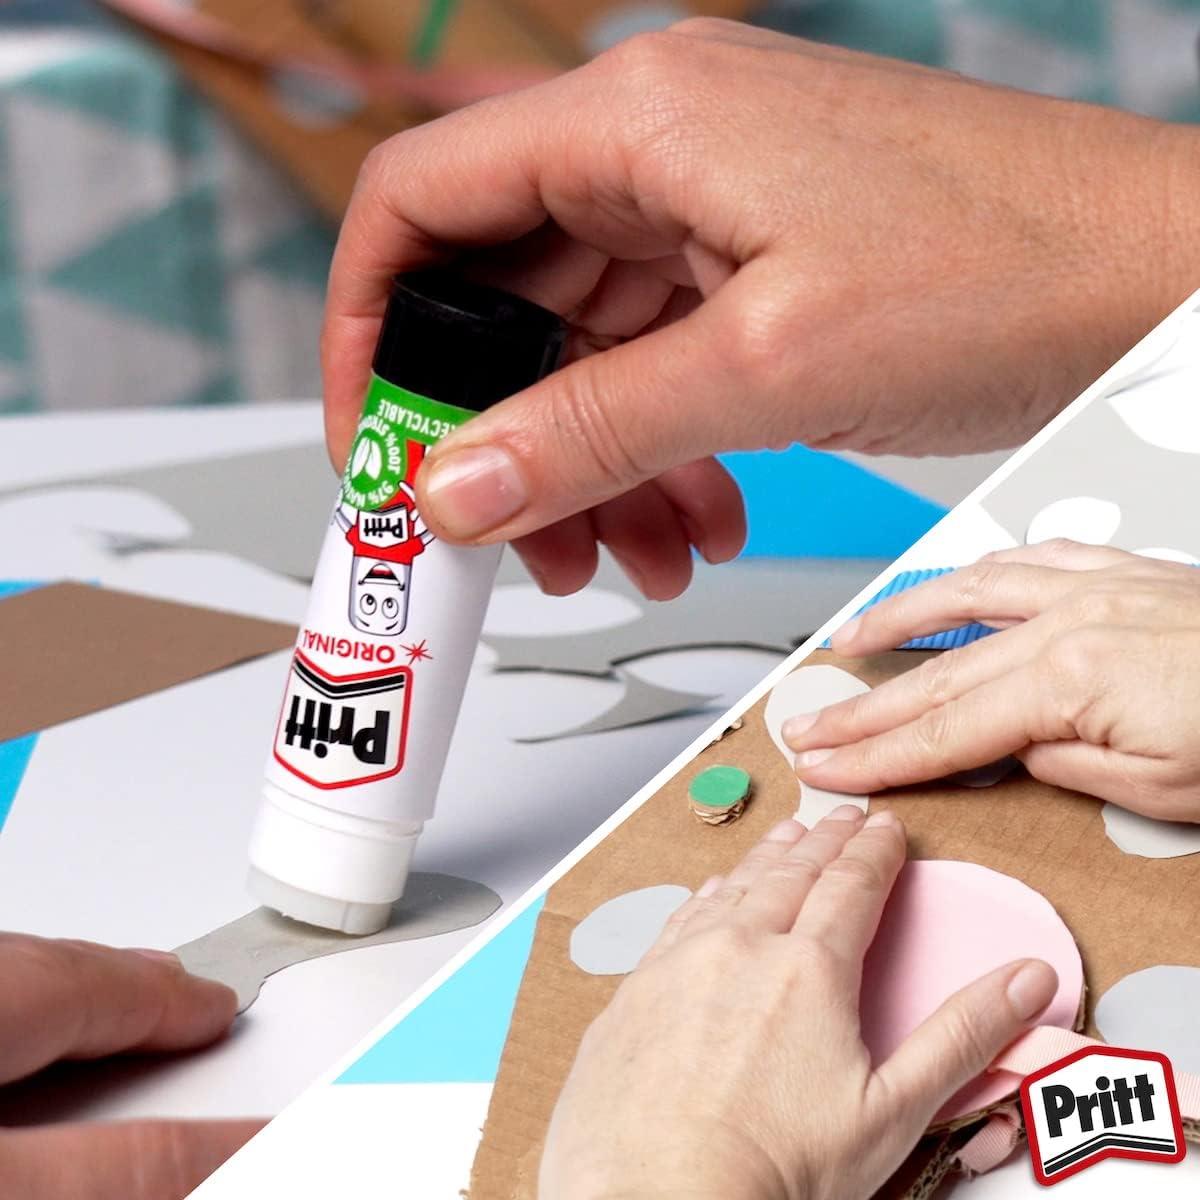 Pritt Glue Stick, Safe & Child-Friendly Craft Glue for Arts & Crafts Activities, Strong-Hold Adhesive for School & Office Supplies, 22 G (Pack of 3)